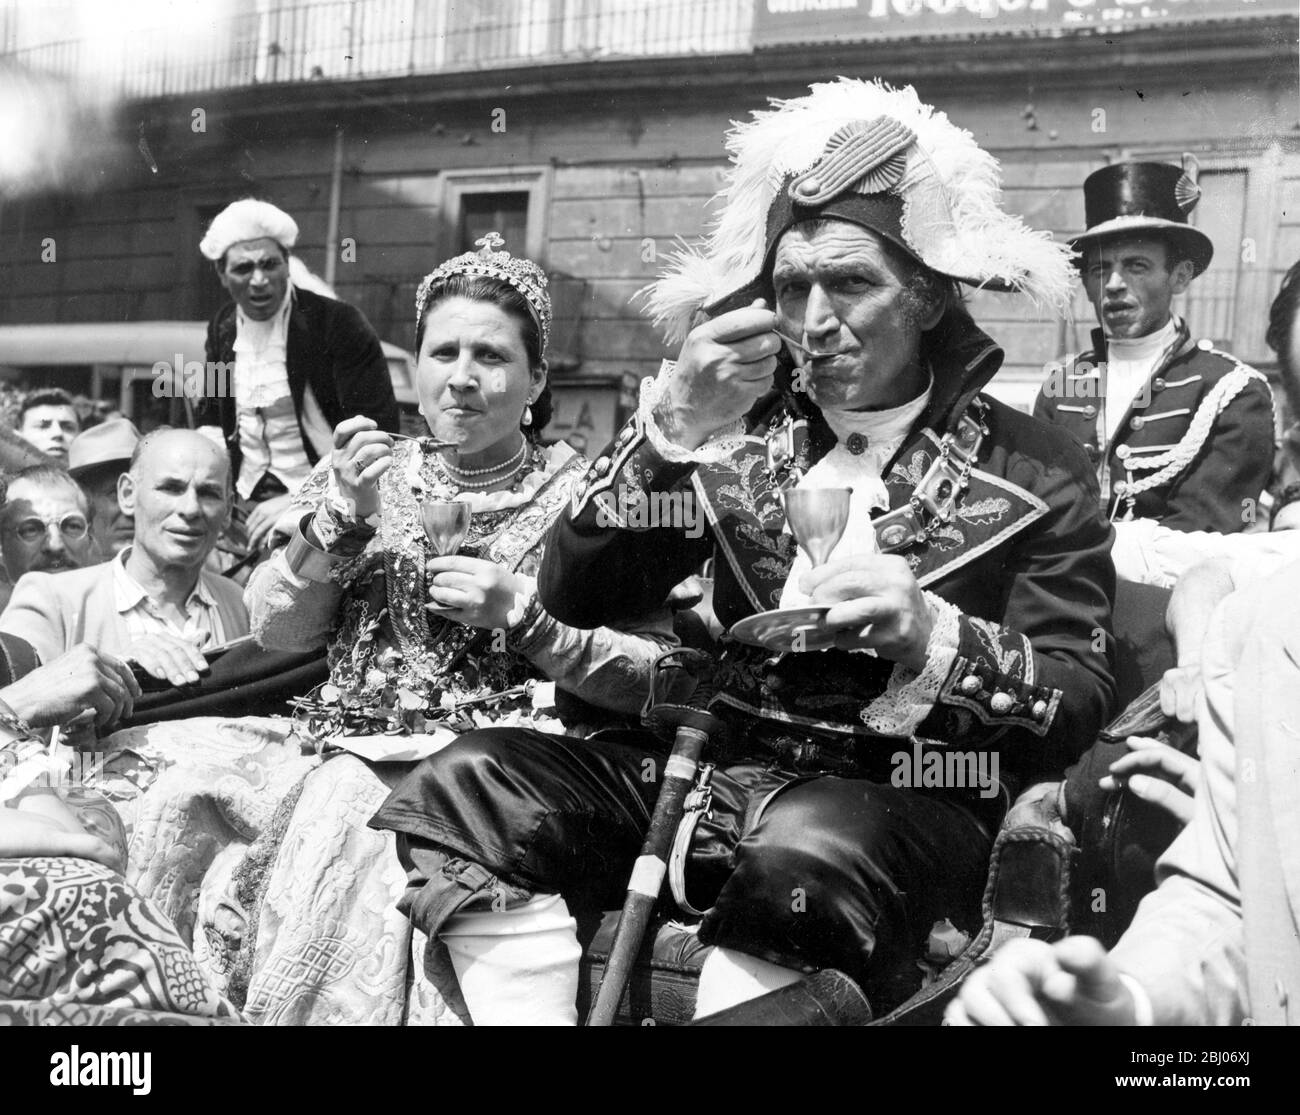 Naples , Italy . - celebrated the Annual Festival of the Dresses People  ( Festa Della Nzegna ) August 28th . - Giuseppe Pignatelli , as King Ferdinando IV and wife Maria as Queen Maria of Naples , eat an ice cream in their state carriage on their way to the waterfront . - September 1949 - - Stock Photo